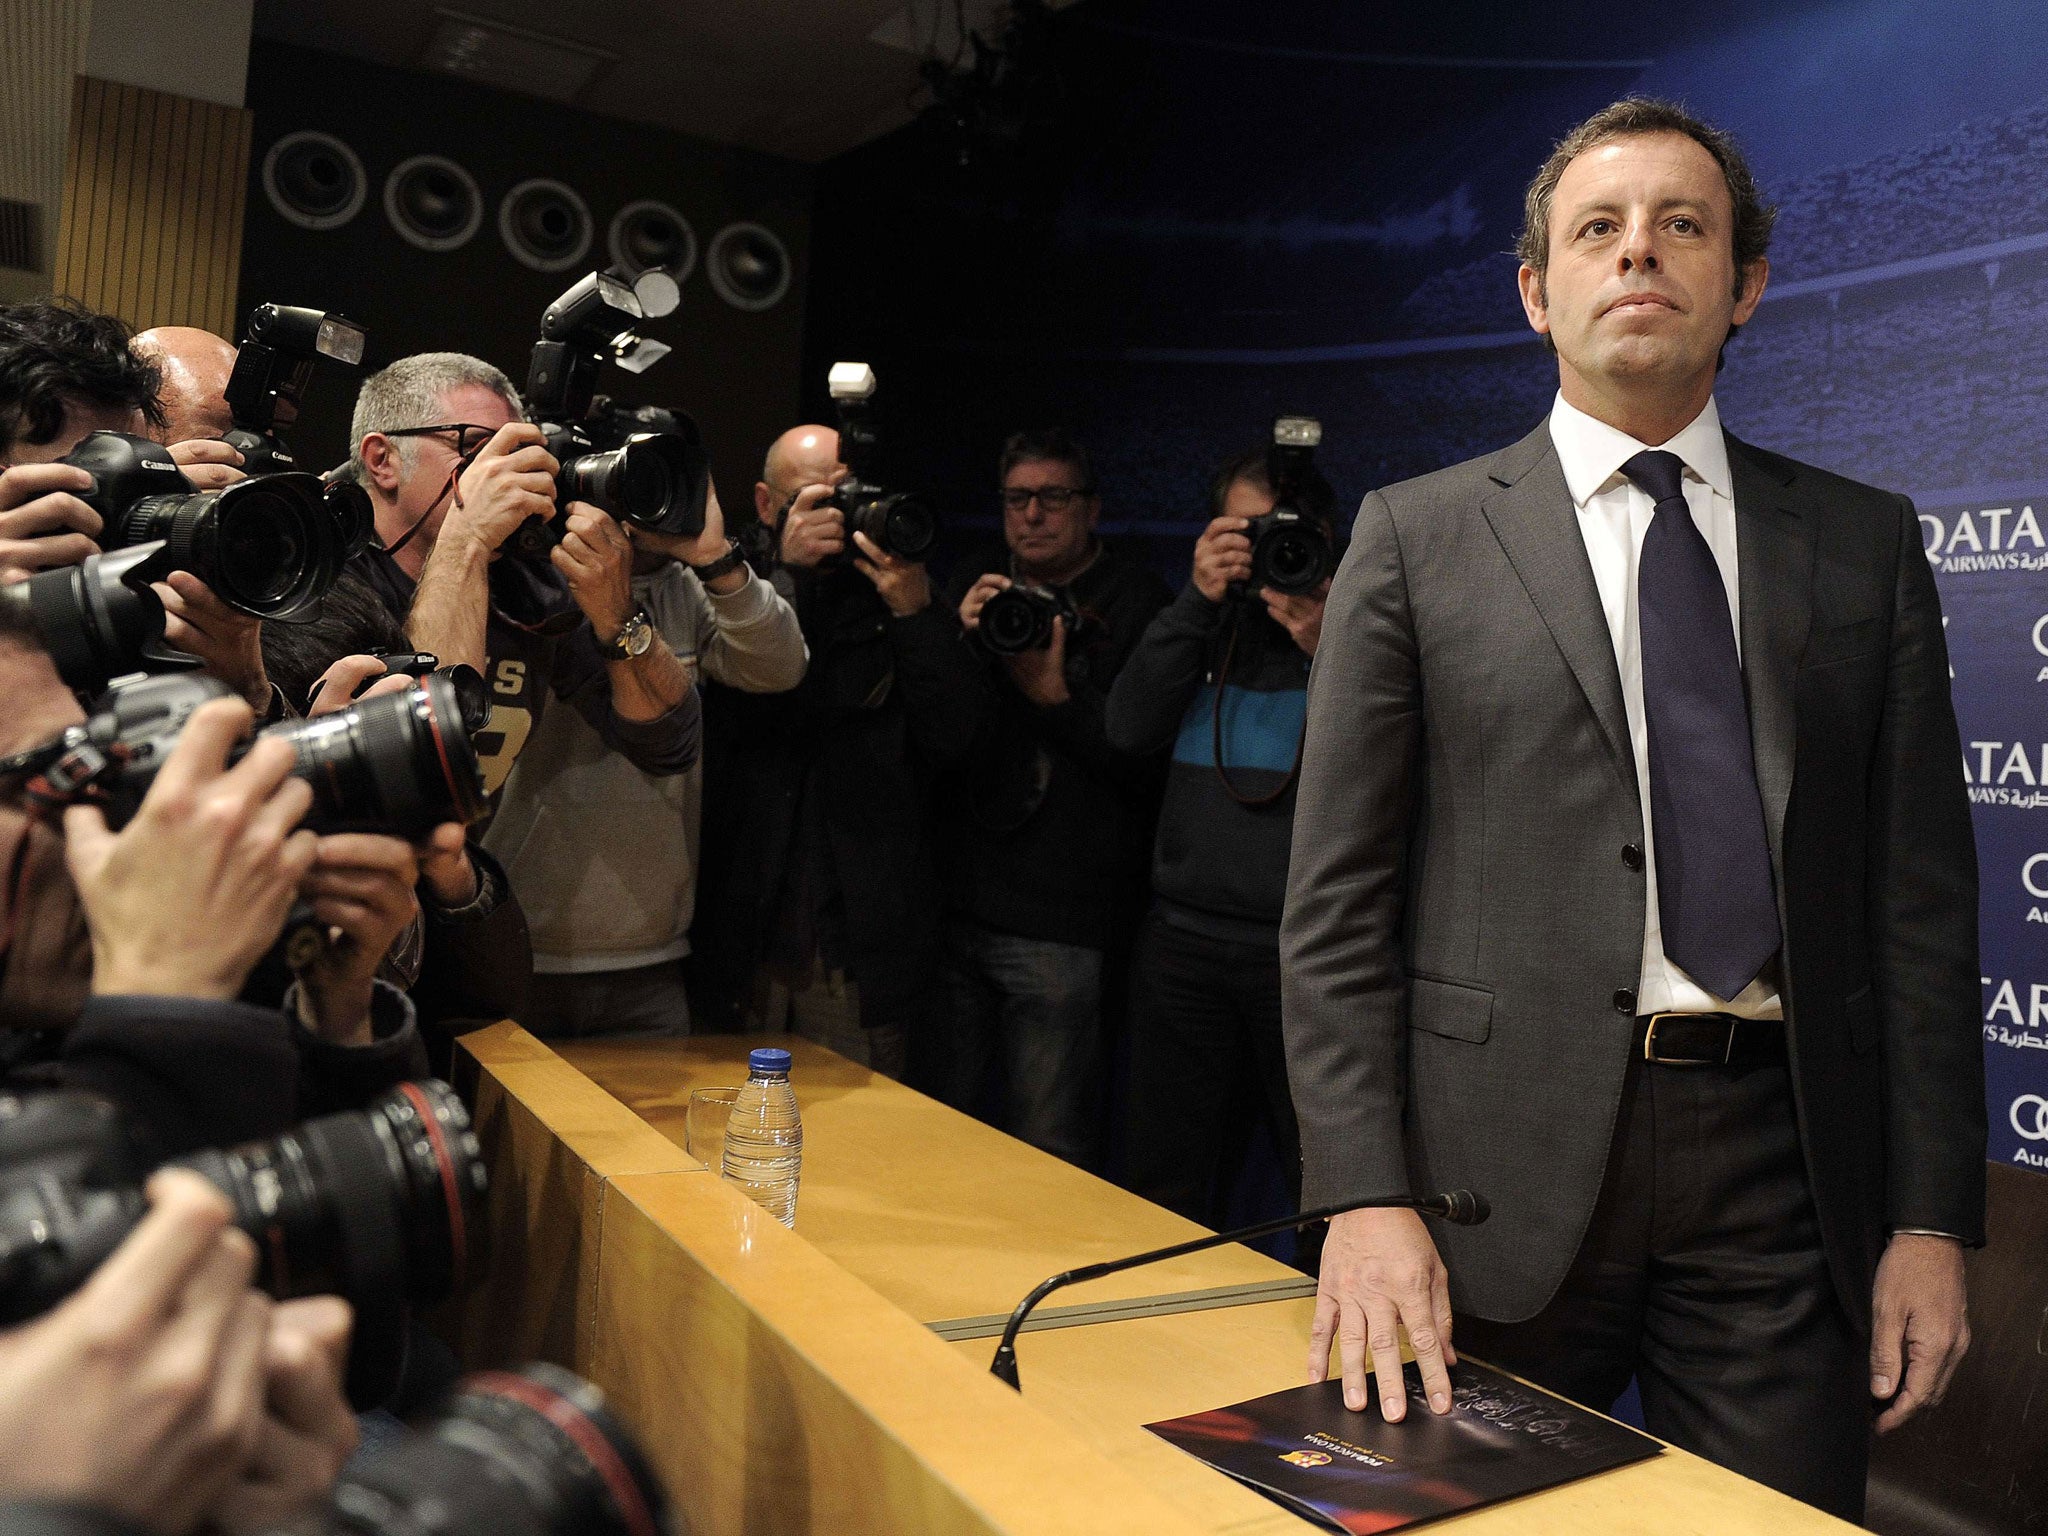 Sandro Rosell announces his resignation from the Barcelona presidency